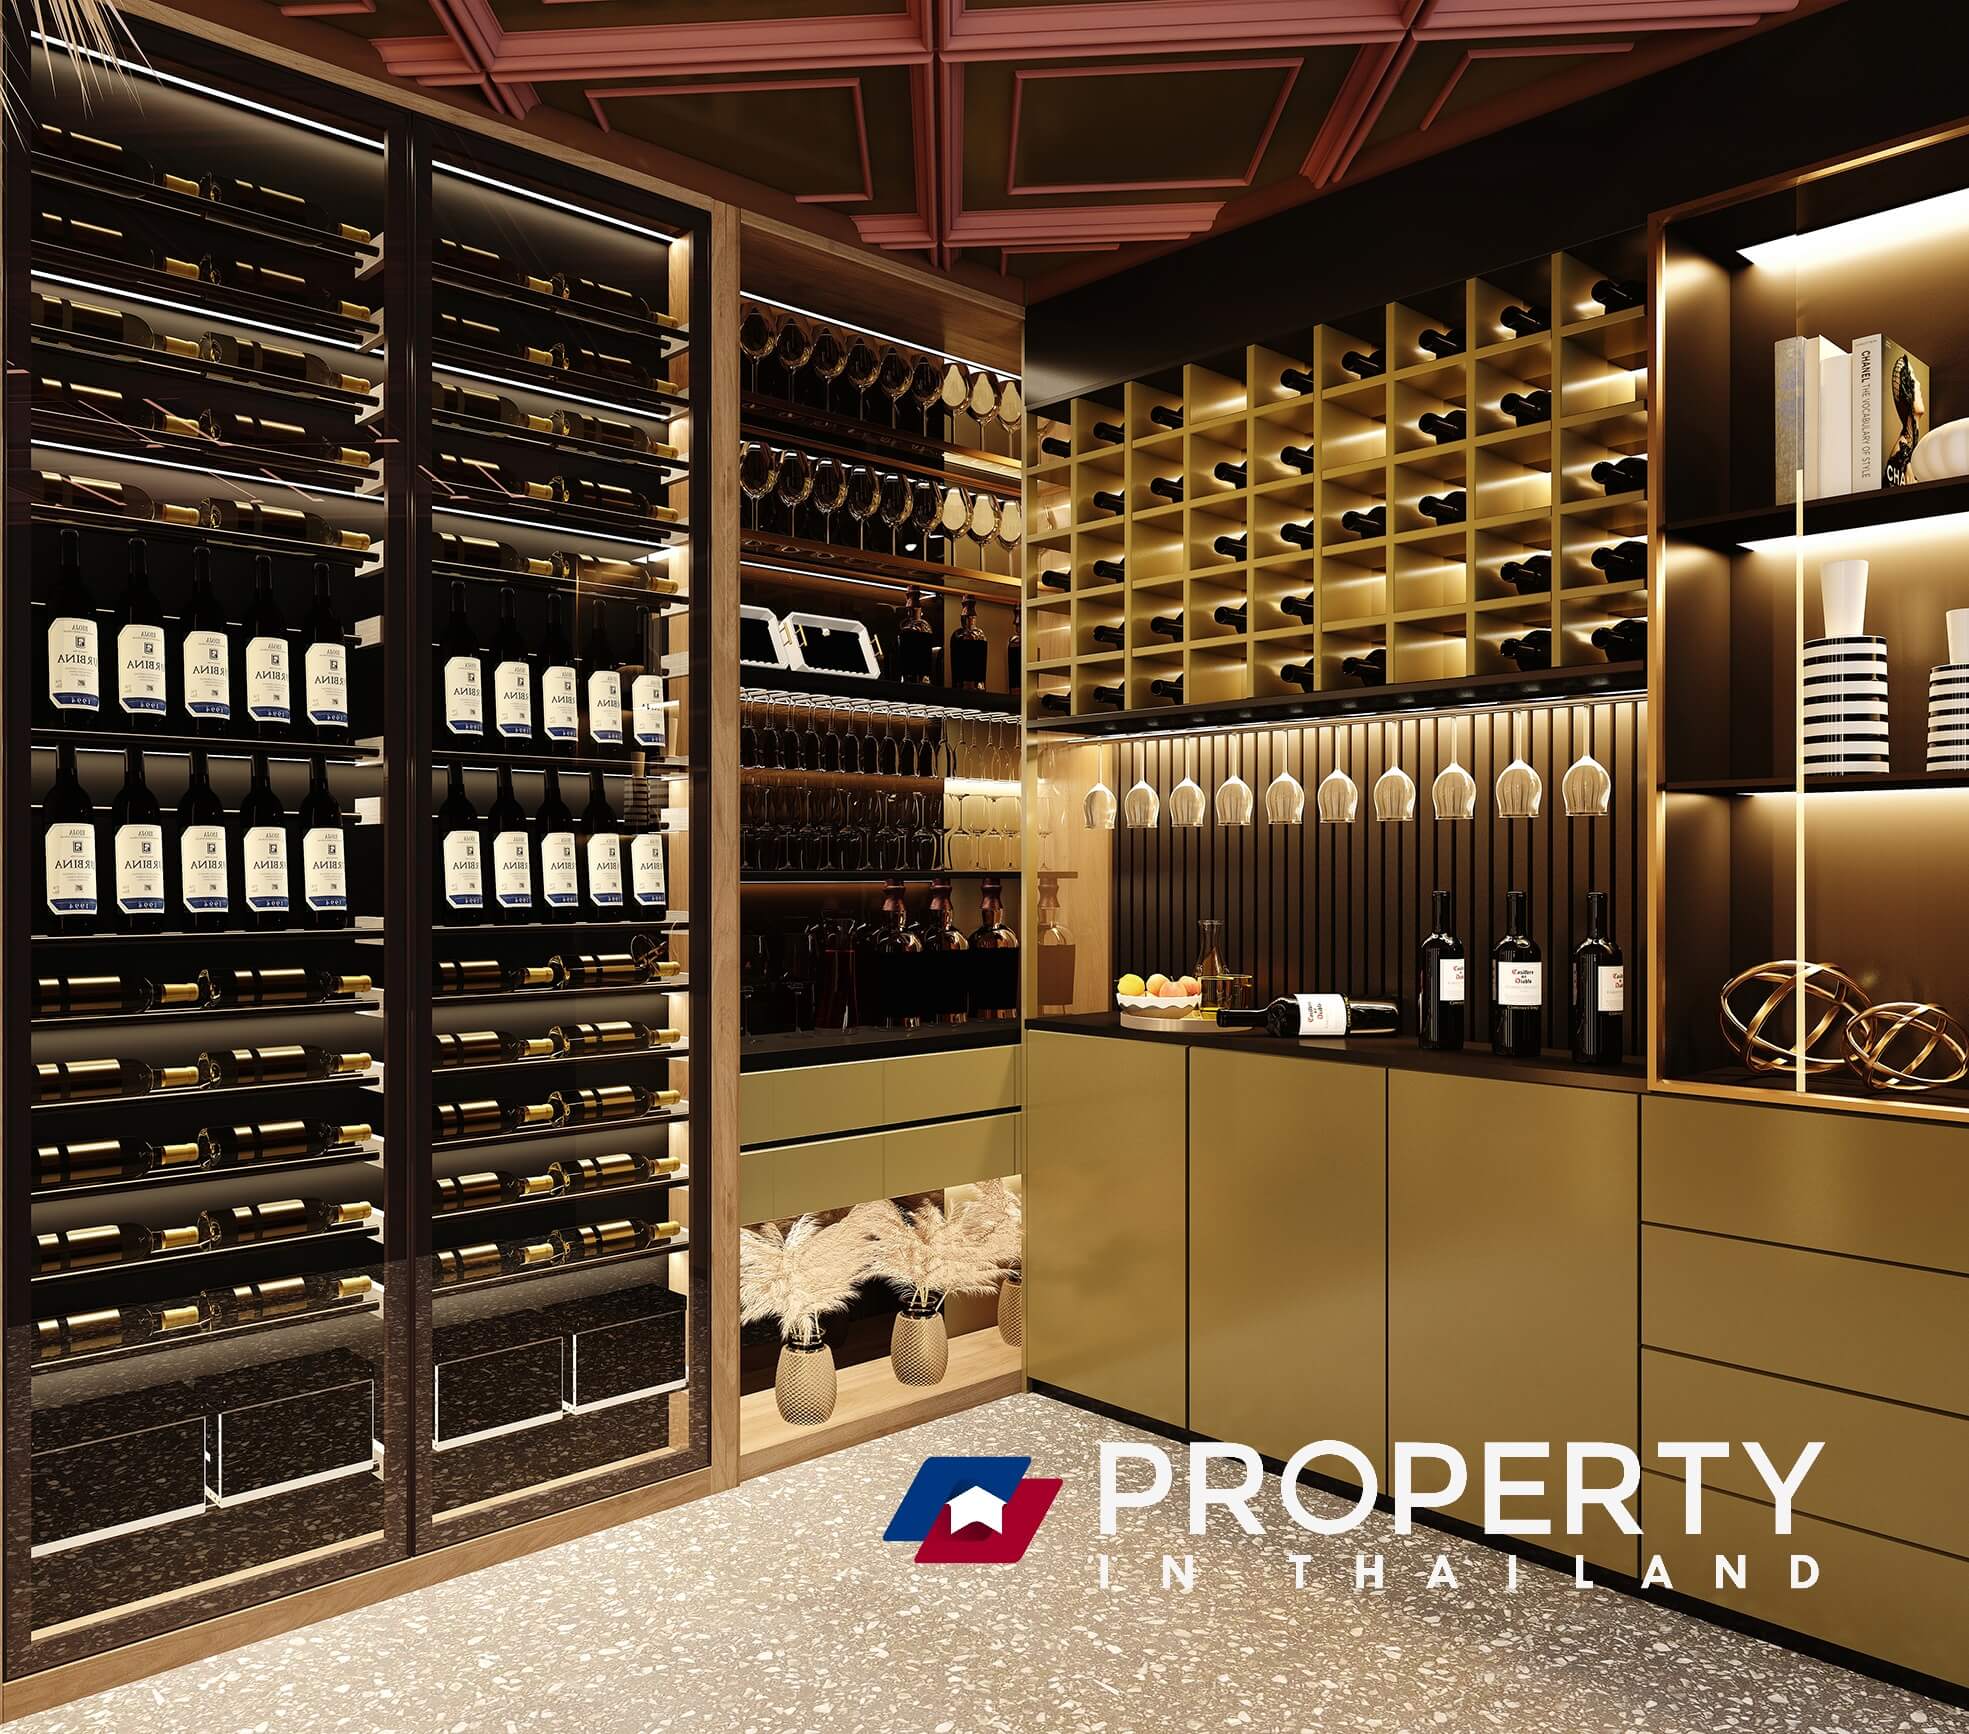 Property in Thailand (Wine Celler)